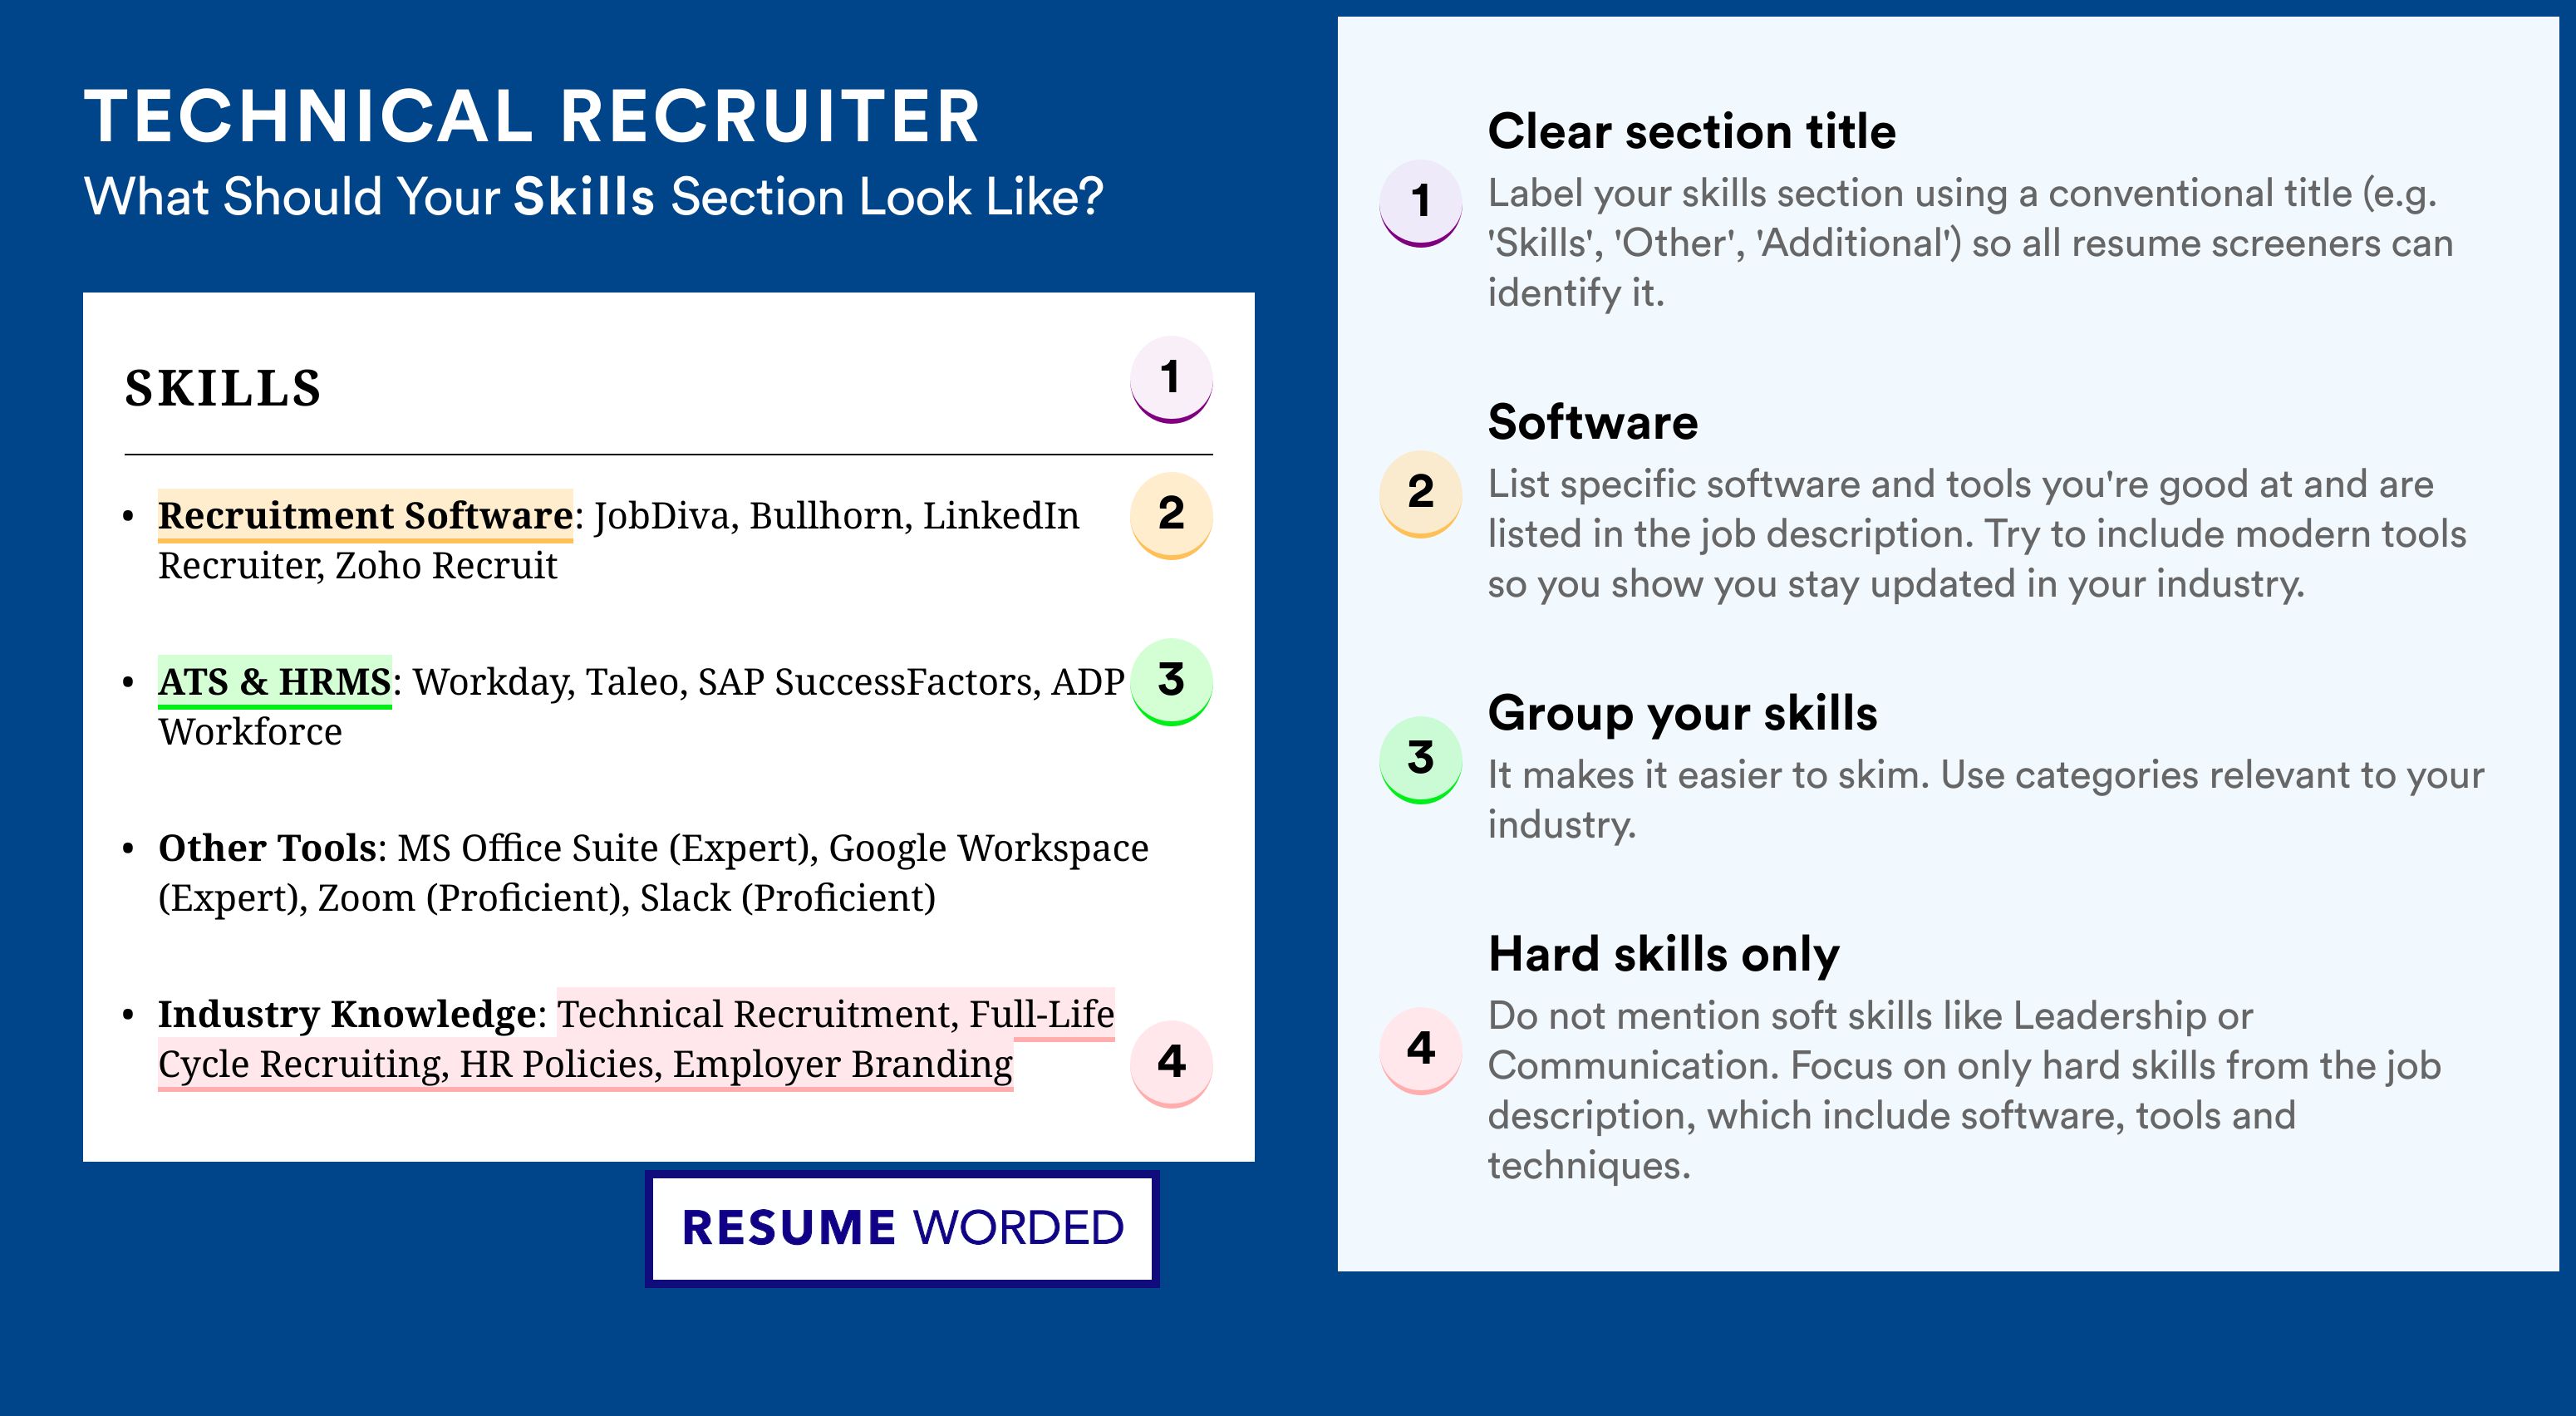 How To Write Your Skills Section - Technical Recruiter Roles